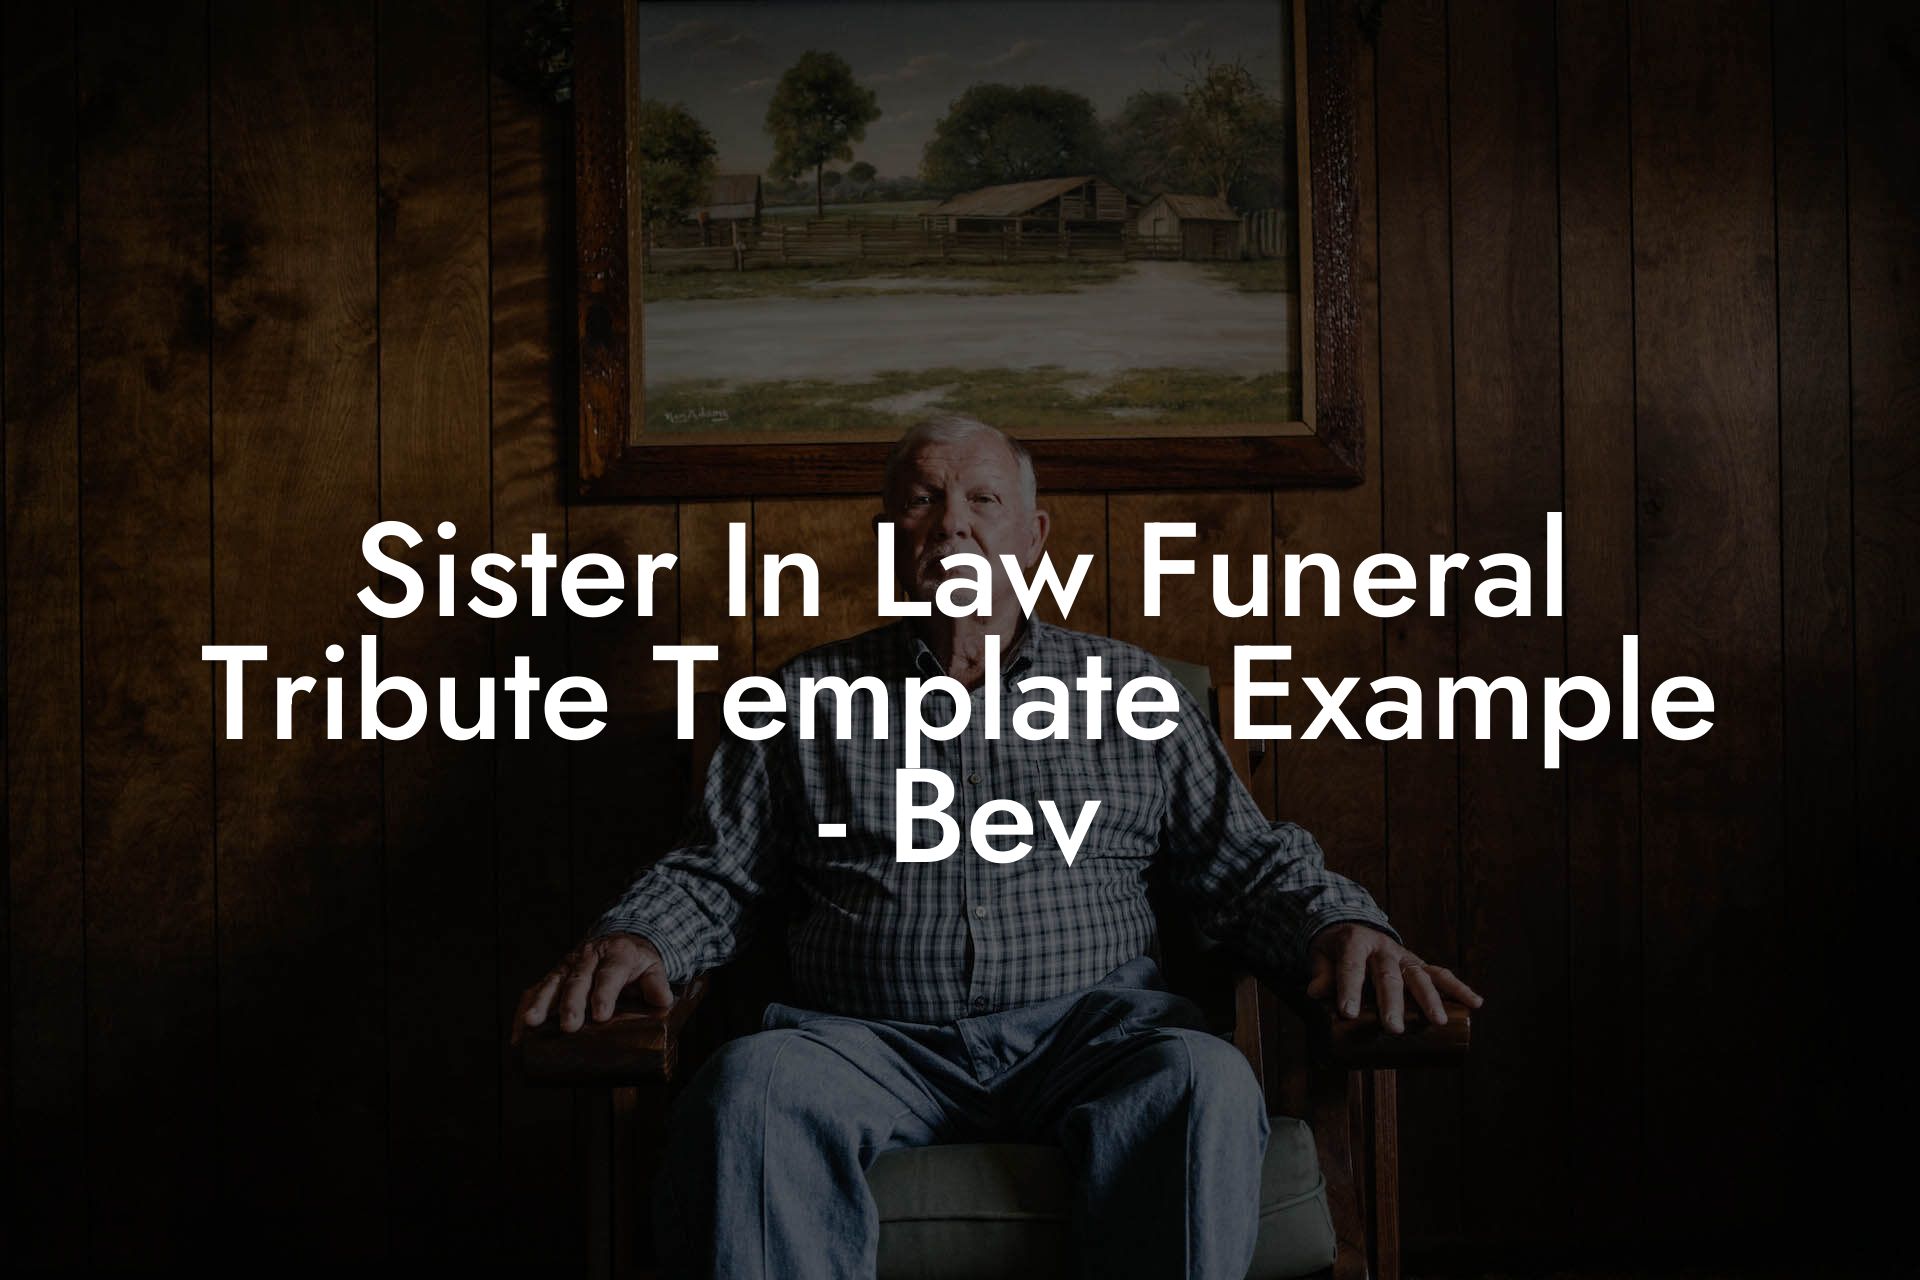 Sister In Law Funeral Tribute Template